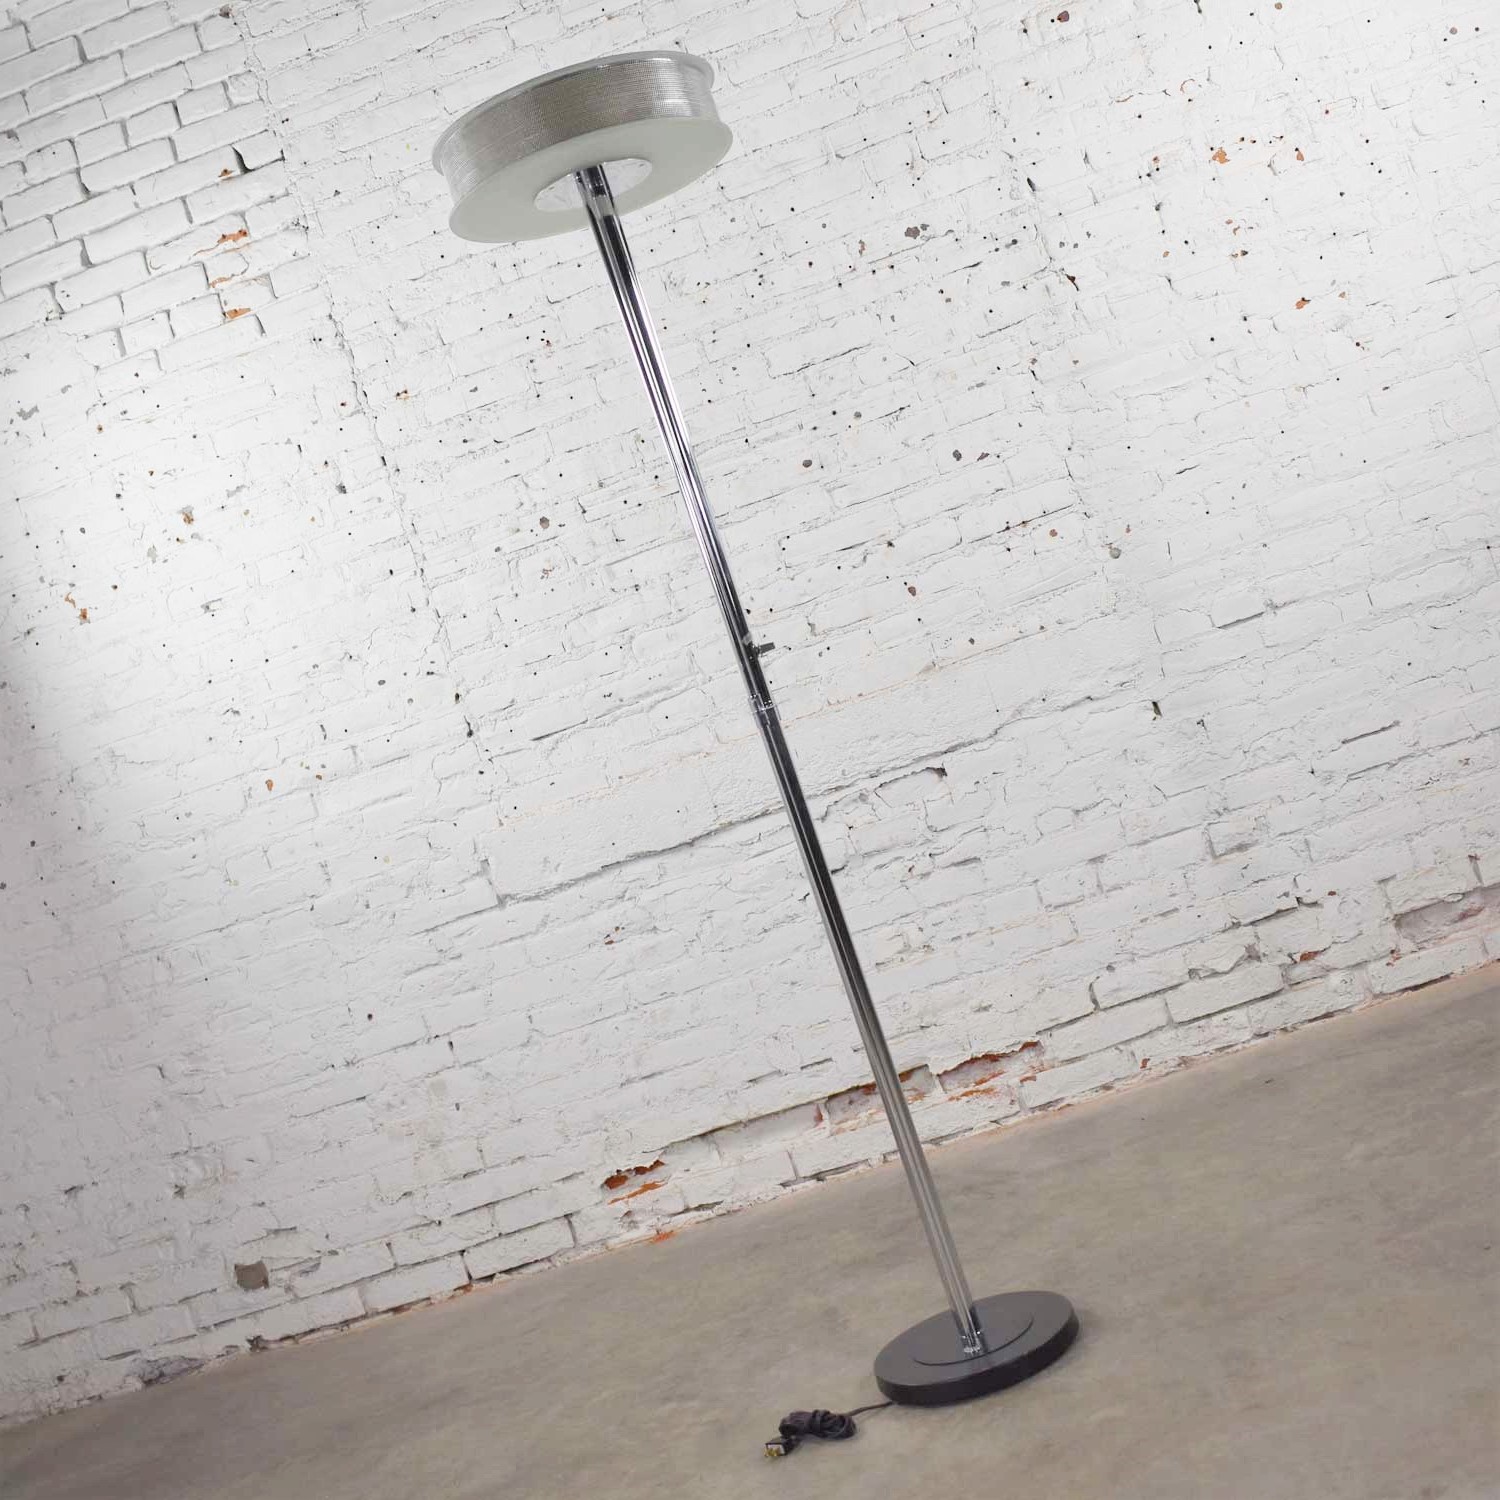 Vintage Modern Chrome Triple Shaft Floor Lamp with Perforated Metal Ring & Glass Disc